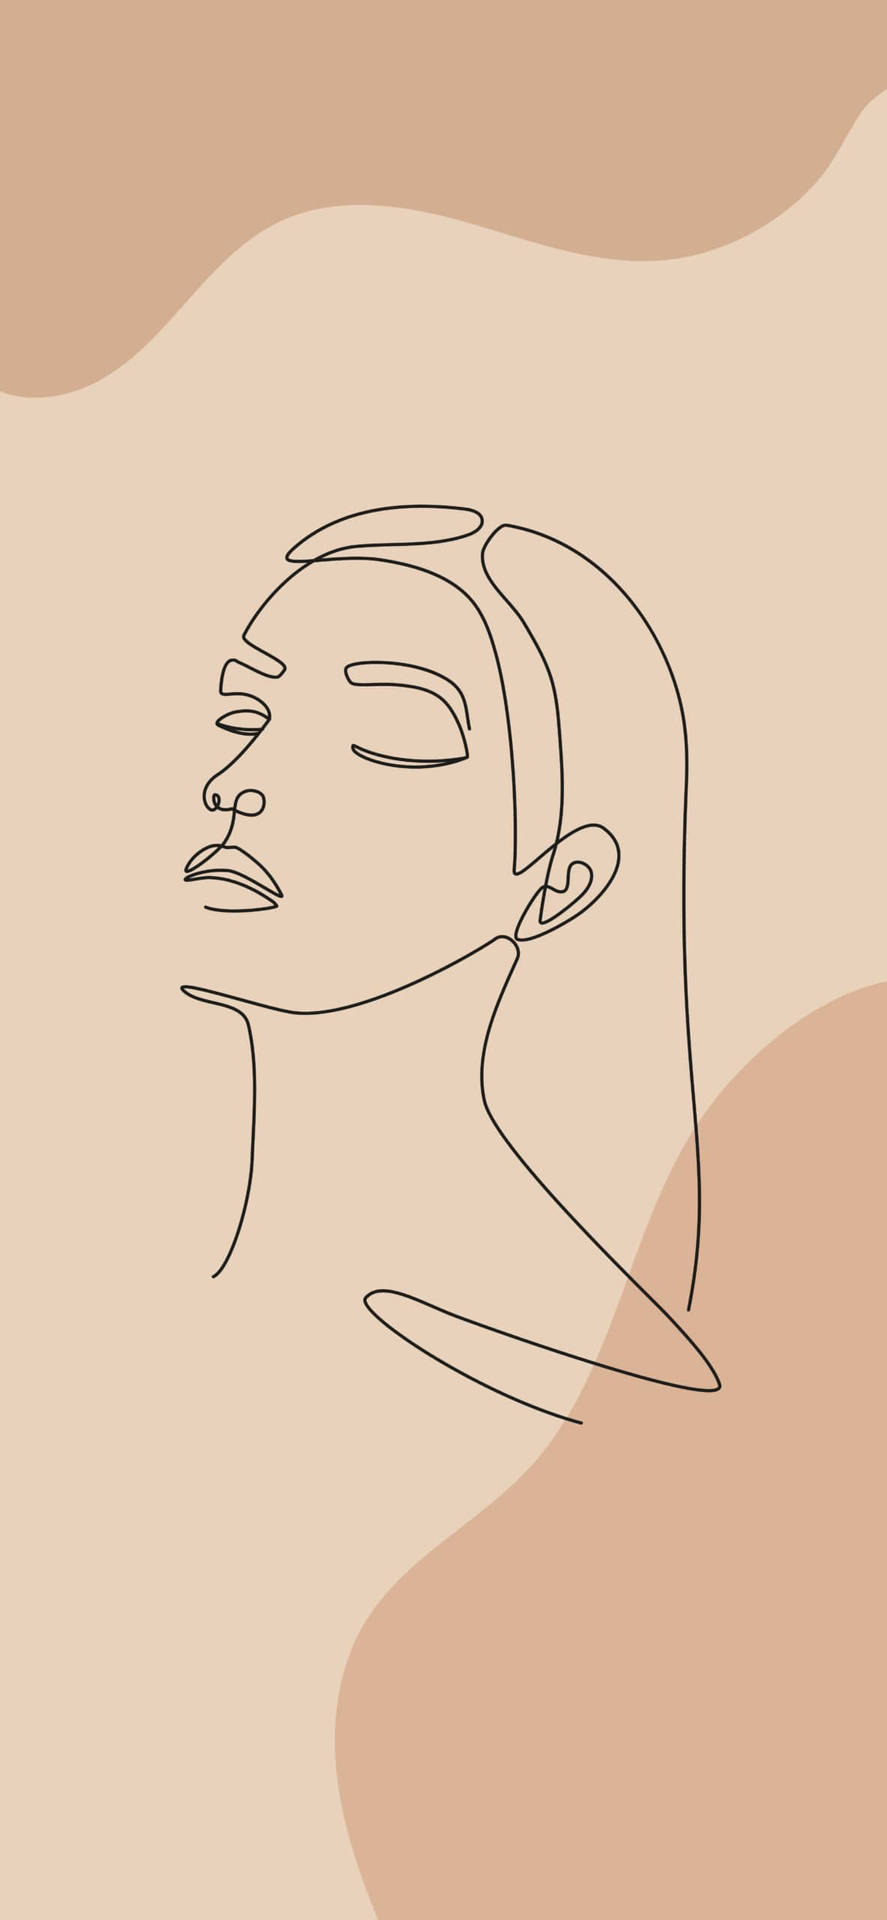 One Line Drawing Relaxed Woman Wallpaper